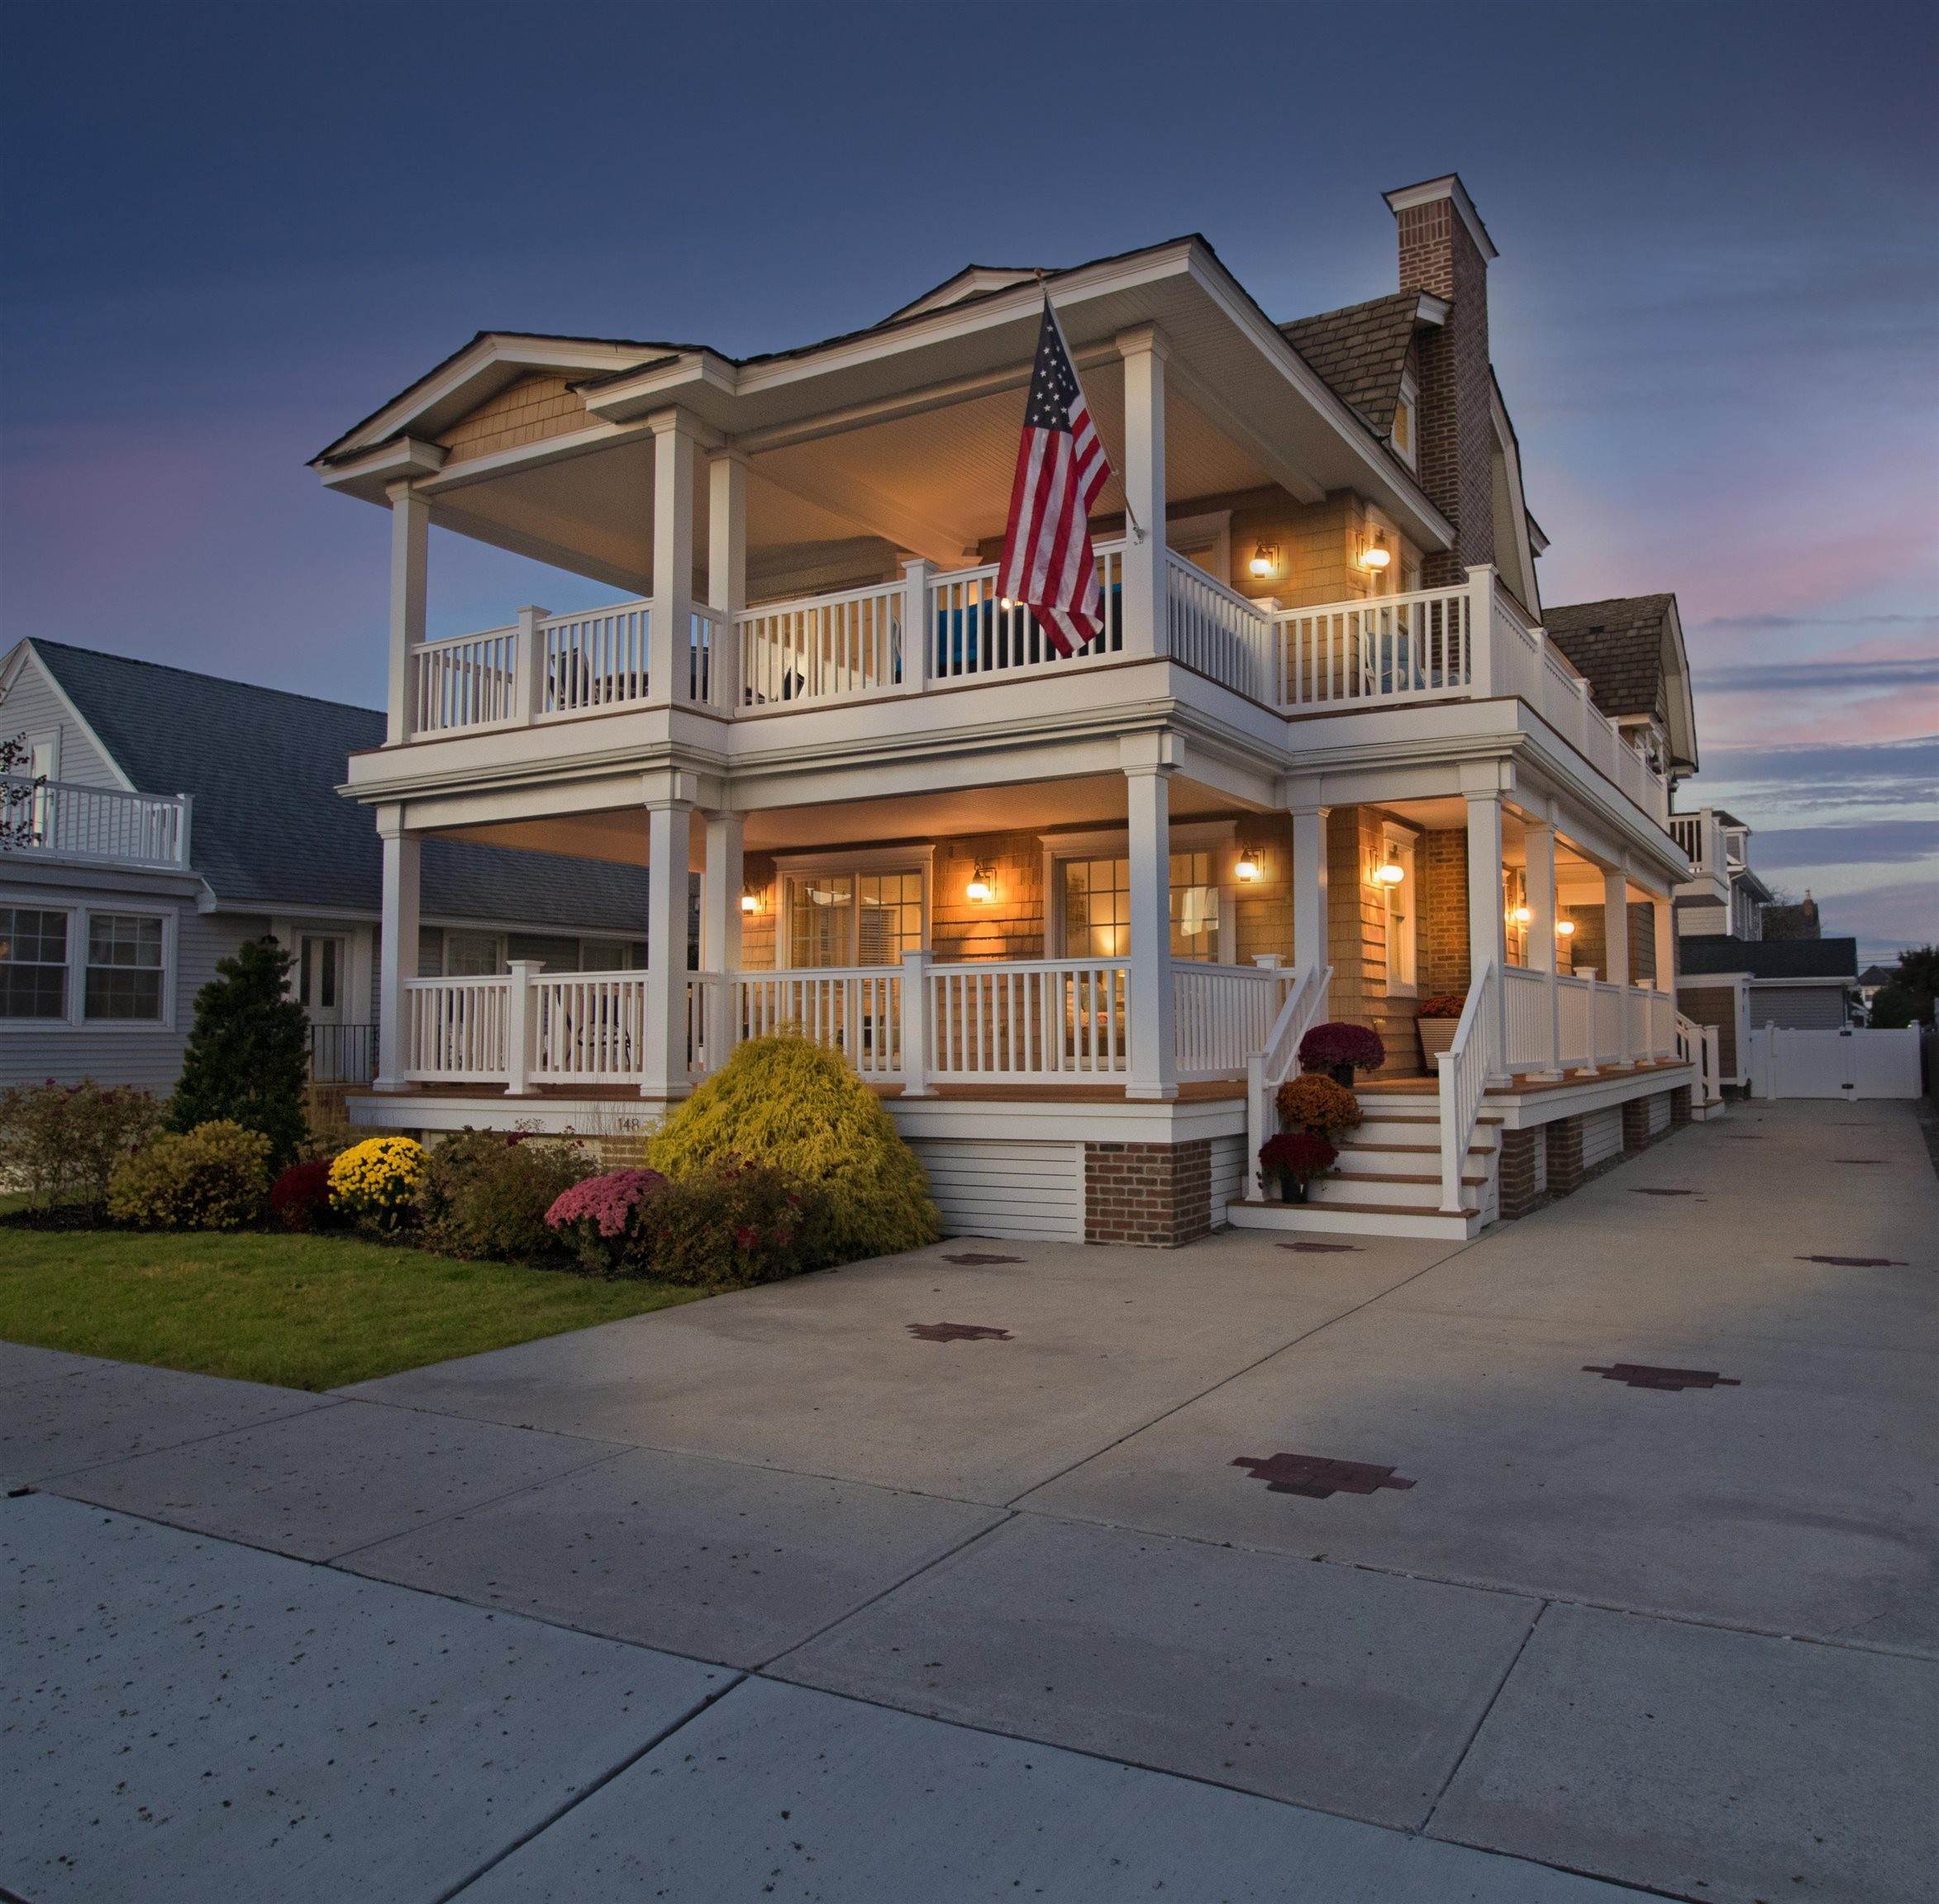 Single Family Homes for Sale at 148 95th Street Stone Harbor, New Jersey 08247 United States